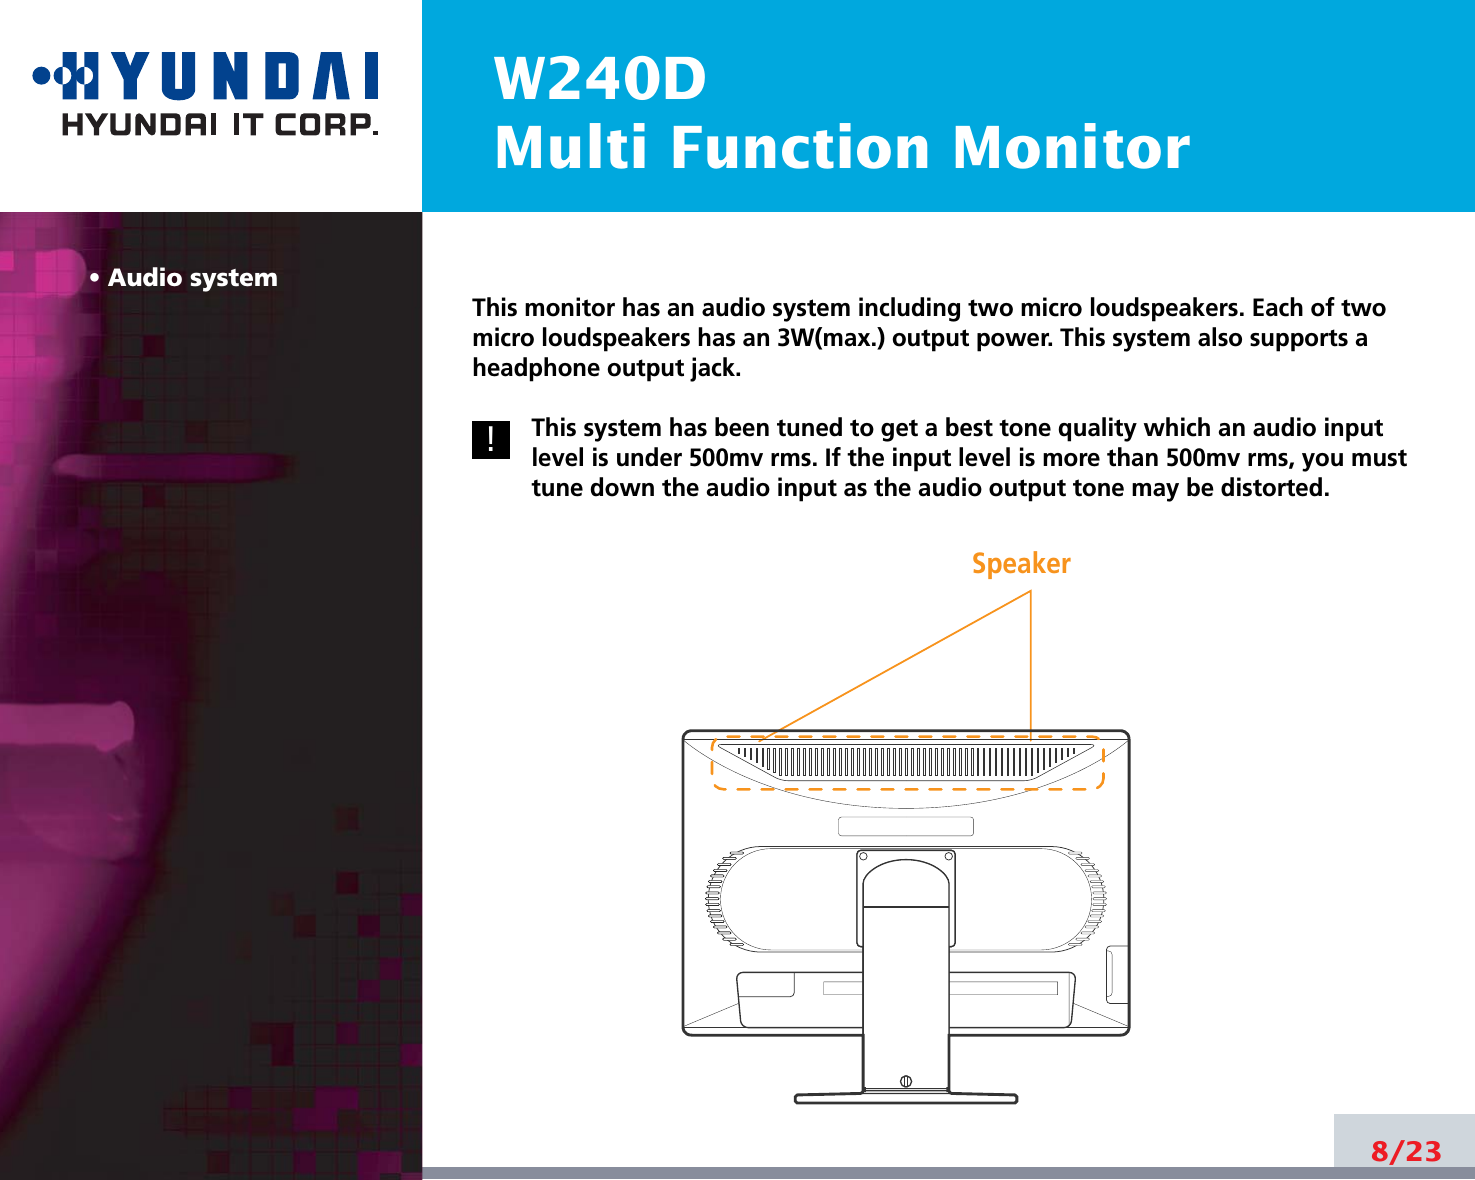 8/22W240DMulti Function Monitor• Audio systemThis monitor has an audio system including two micro loudspeakers. Each of twomicro loudspeakers has an 3W(max.) output power. This system also supports aheadphone output jack.This system has been tuned to get a best tone quality which an audio inputlevel is under 500mv rms. If the input level is more than 500mv rms, you musttune down the audio input as the audio output tone may be distorted.8/23!!Speaker